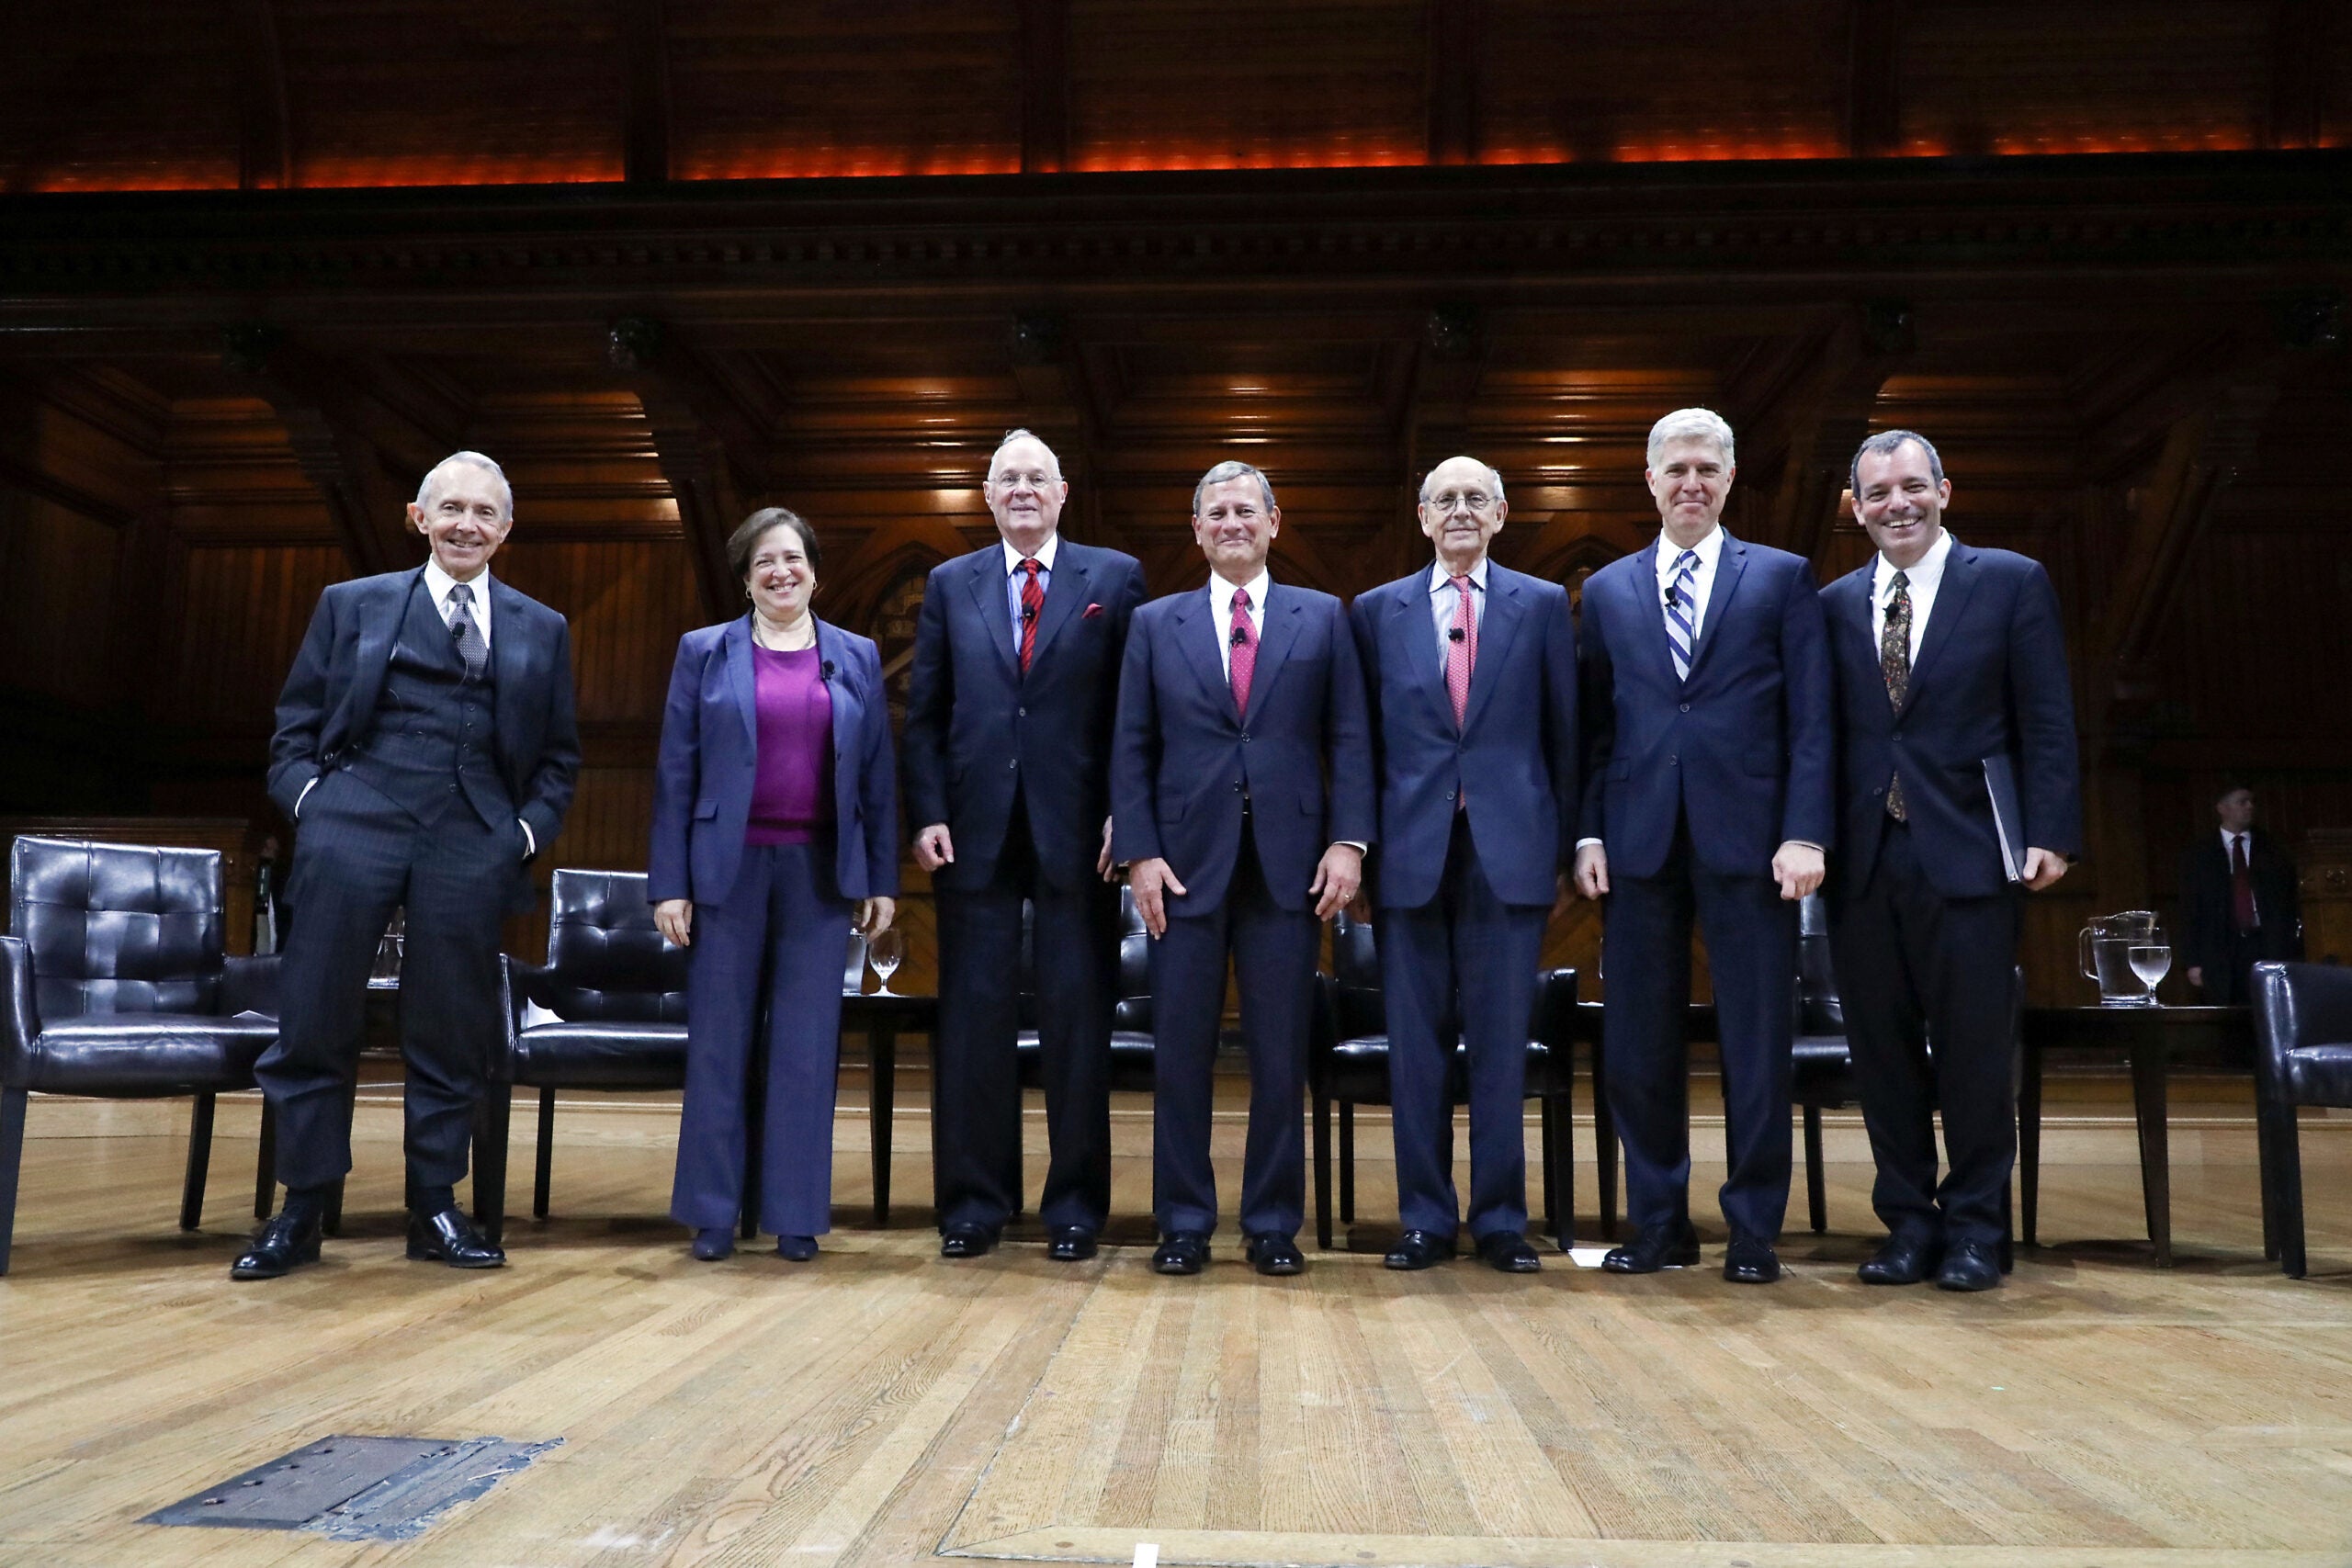 All rise! At HLS, a conversation with six Justices of the U.S. Supreme Court